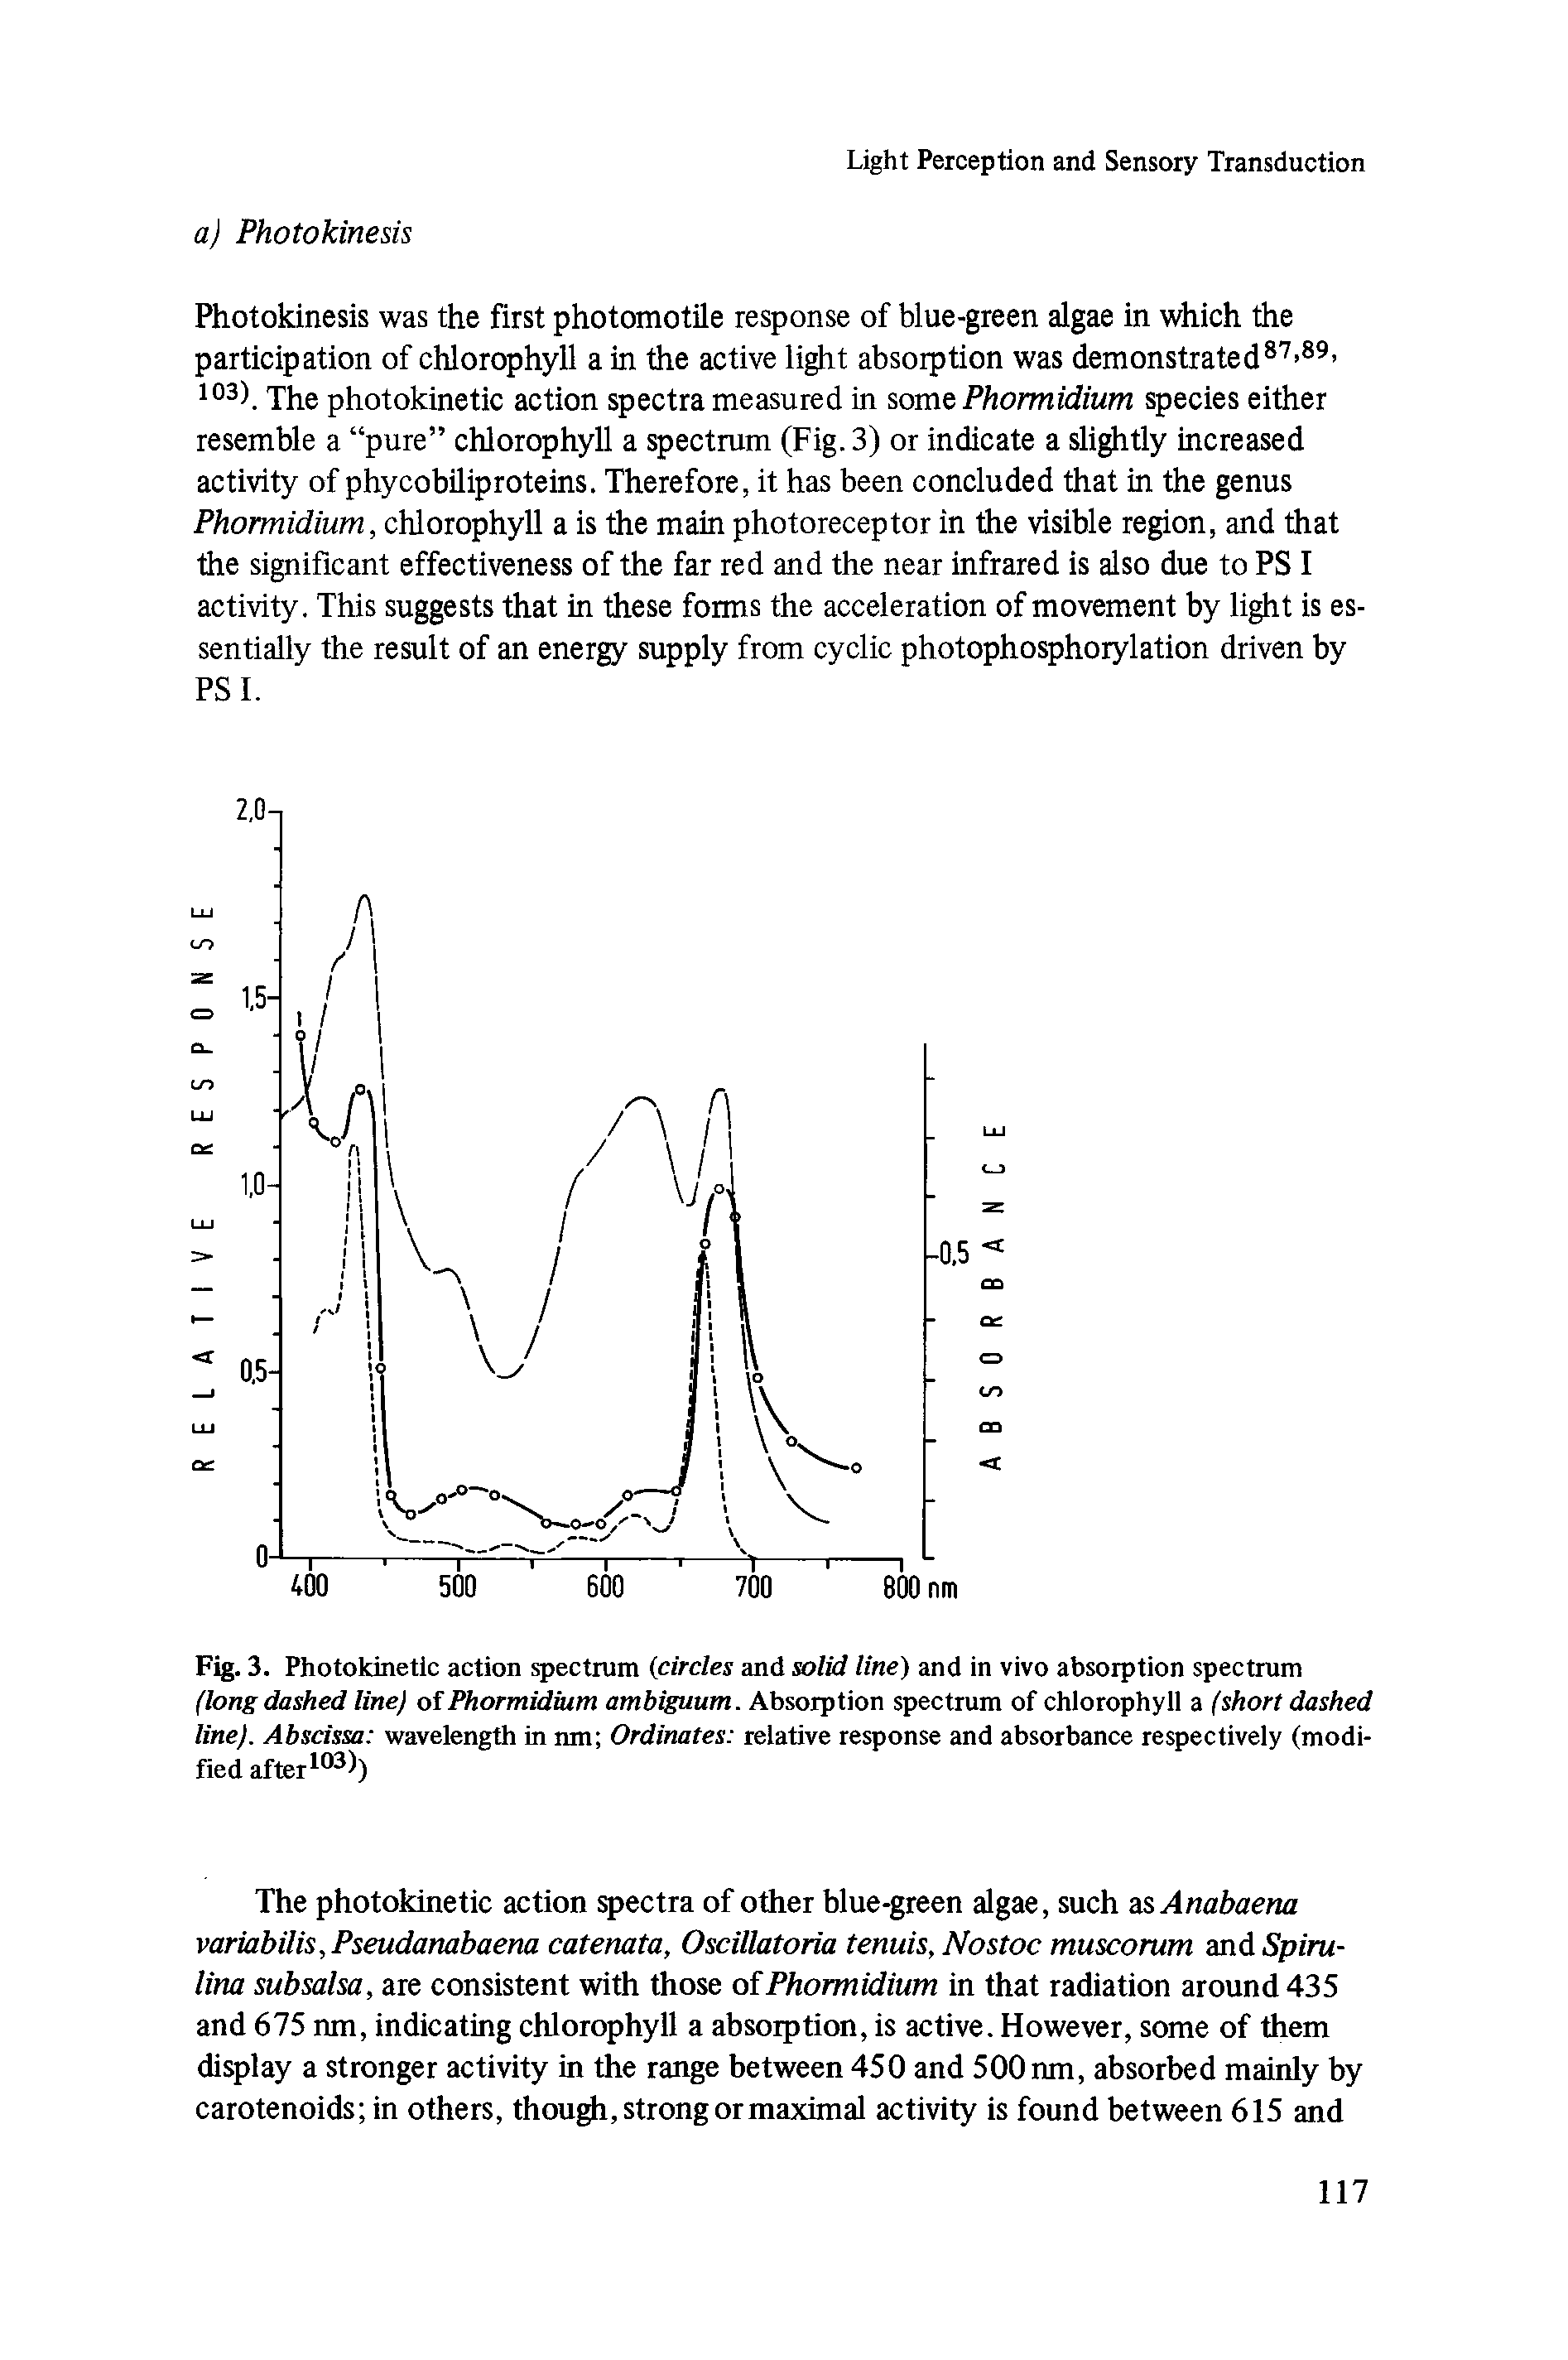 Fig. 3. Photokinetic action spectrum (circles and solid line) and in vivo absorption spectrum (long dashed line) of Phormidium ambiguum. Absorption spectrum of chlorophyll a (short dashed line). Abscissa wavelength in nm Ordinates relative response and absorbance respectively (modified after103 )...